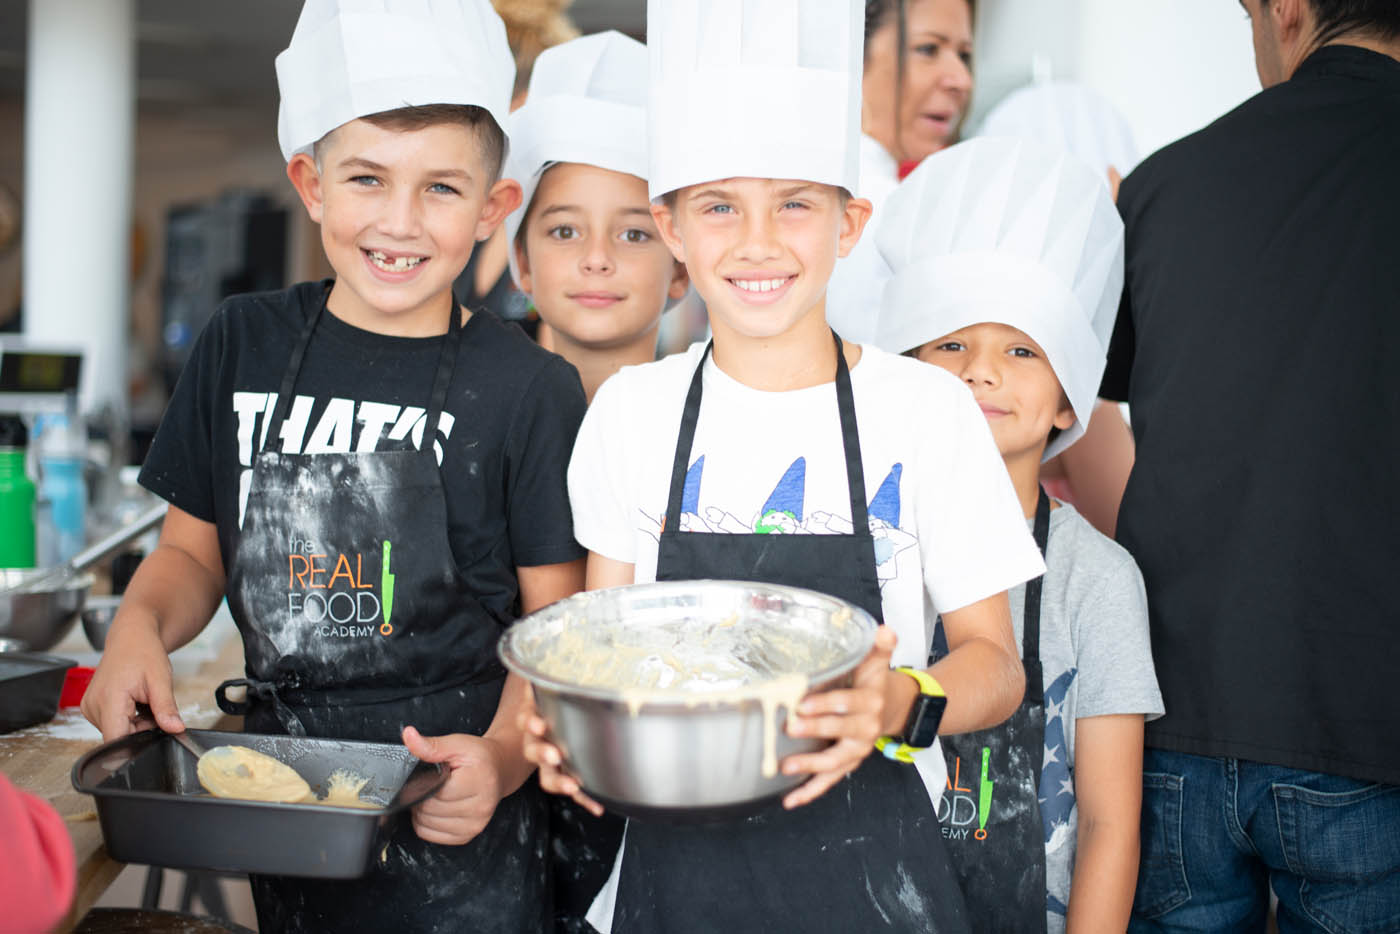 A young man holding a bowl at The Real Food Academy's cooking summer camp in Miami, FL.